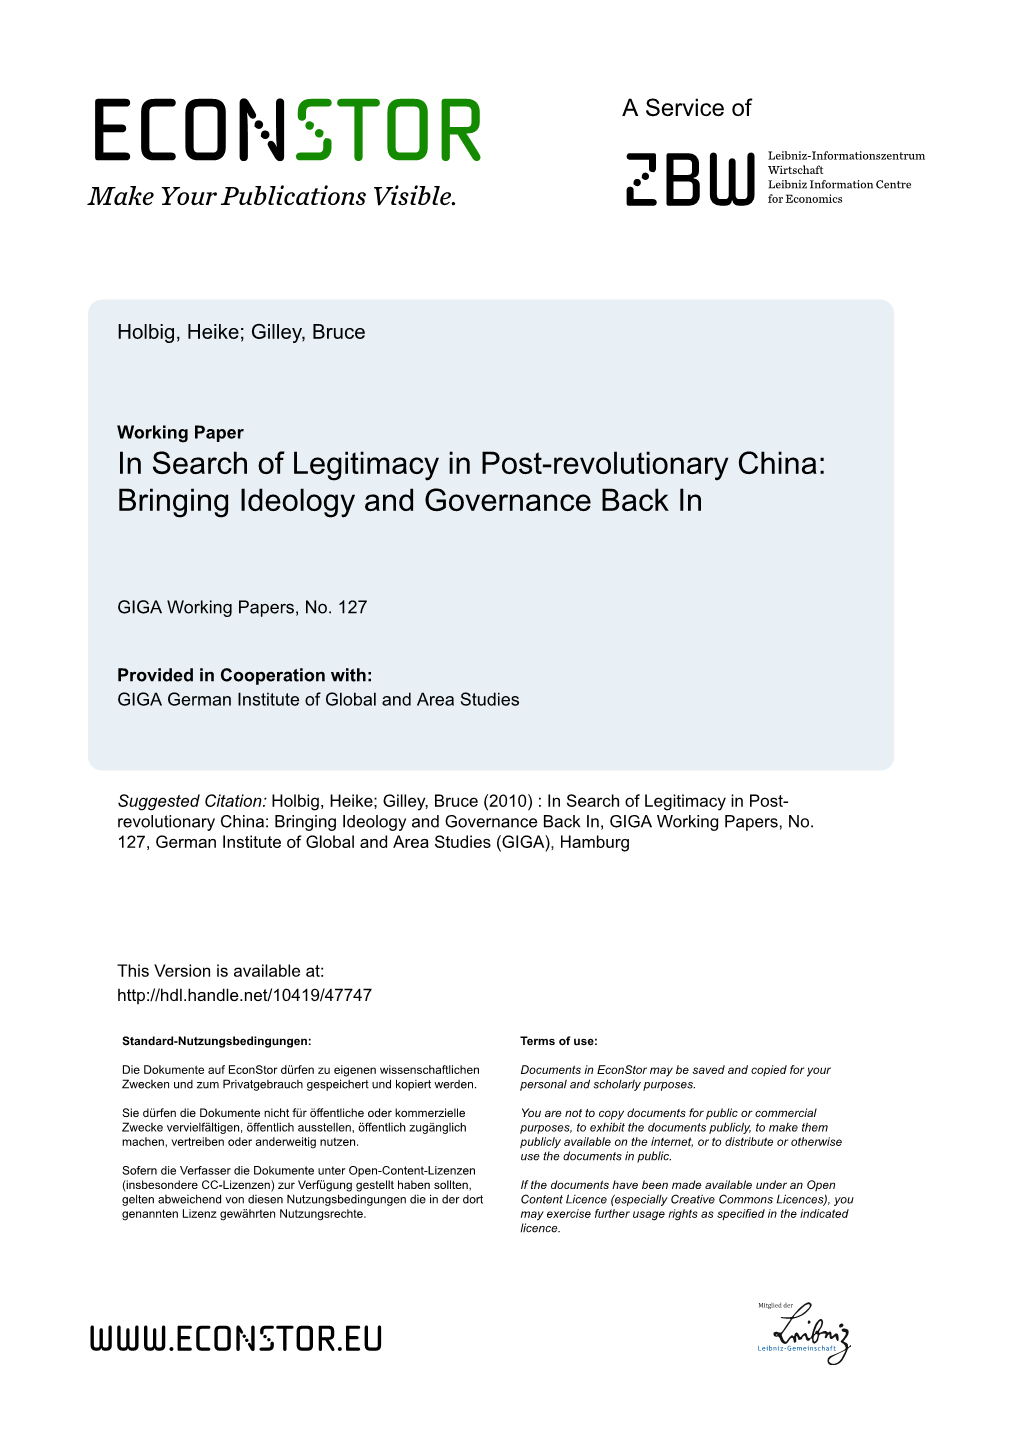 In Search of Legitimacy in Post-Revolutionary China: Bringing Ideology and Governance Back In